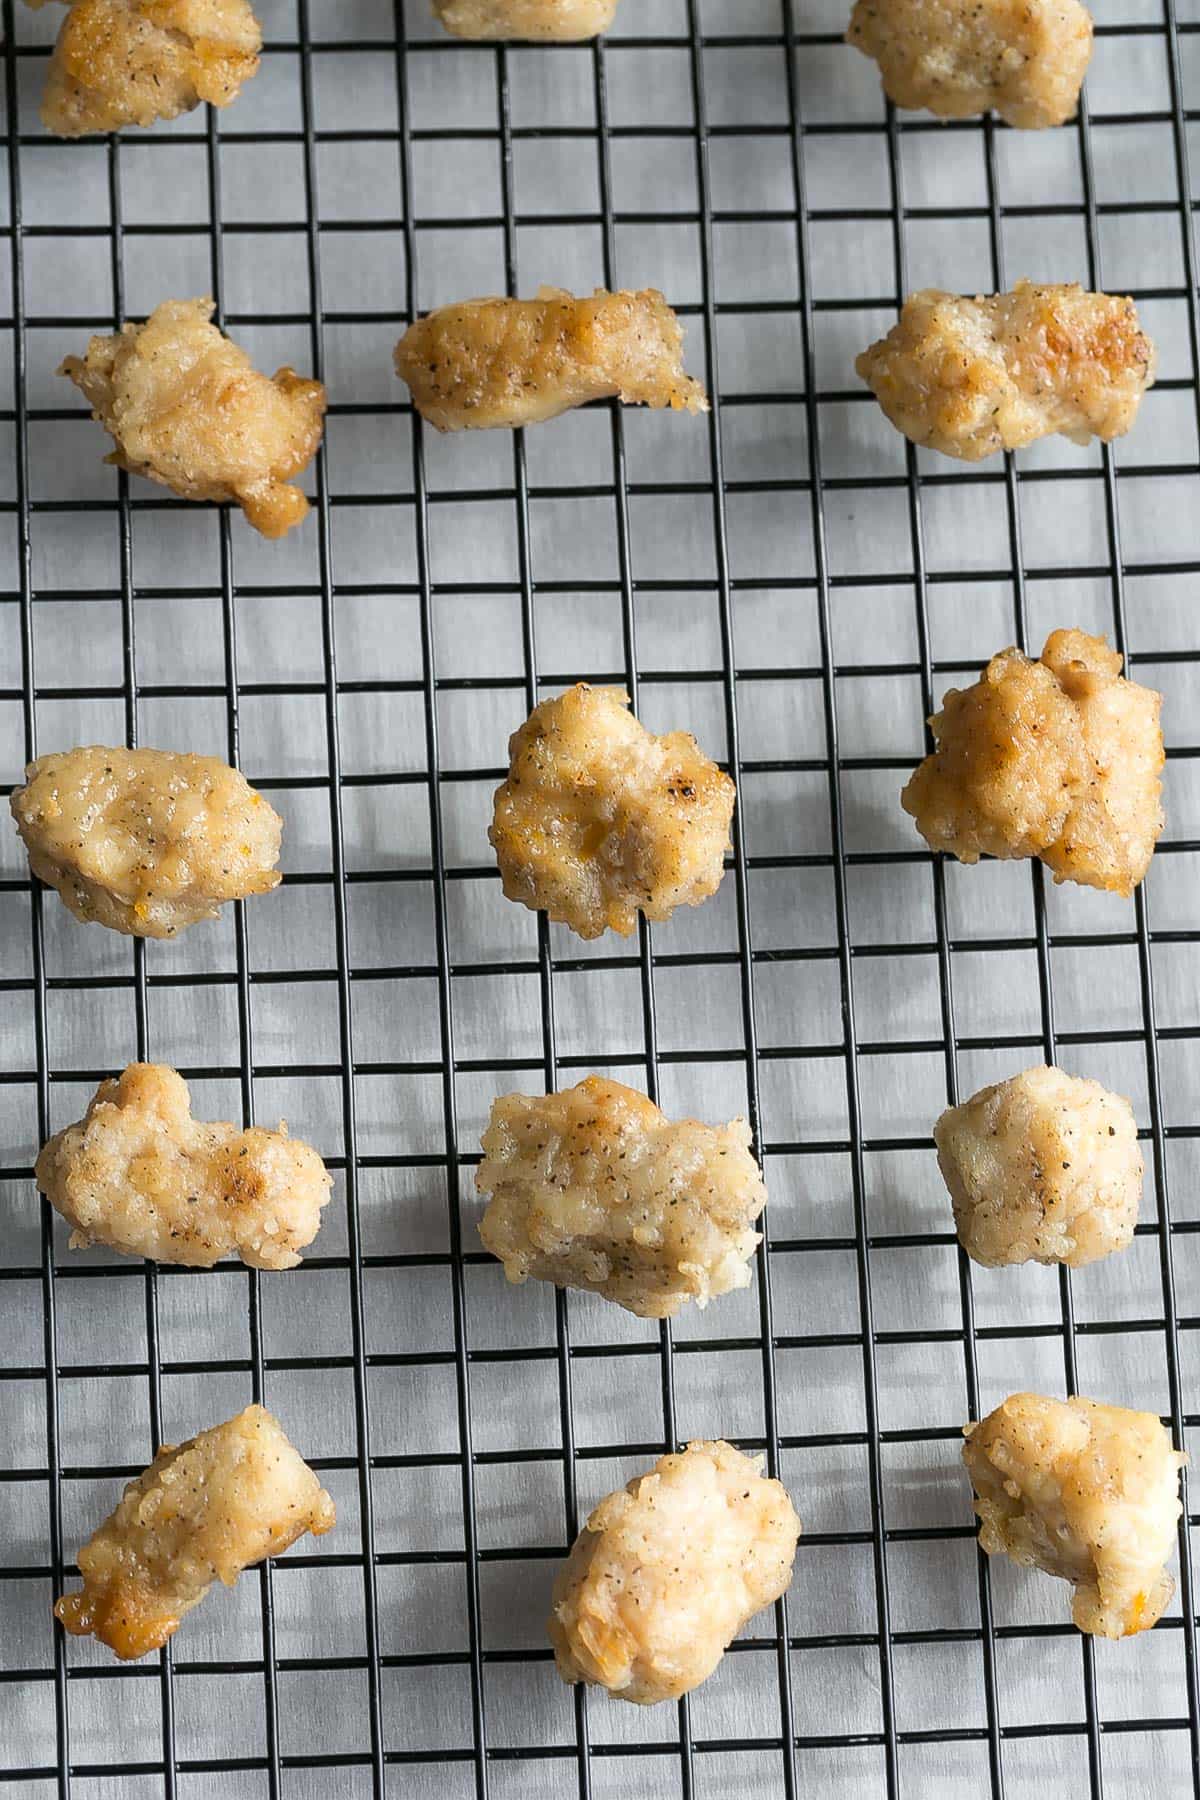 Overhead view of cooked breaded chicken bites on a wire rack